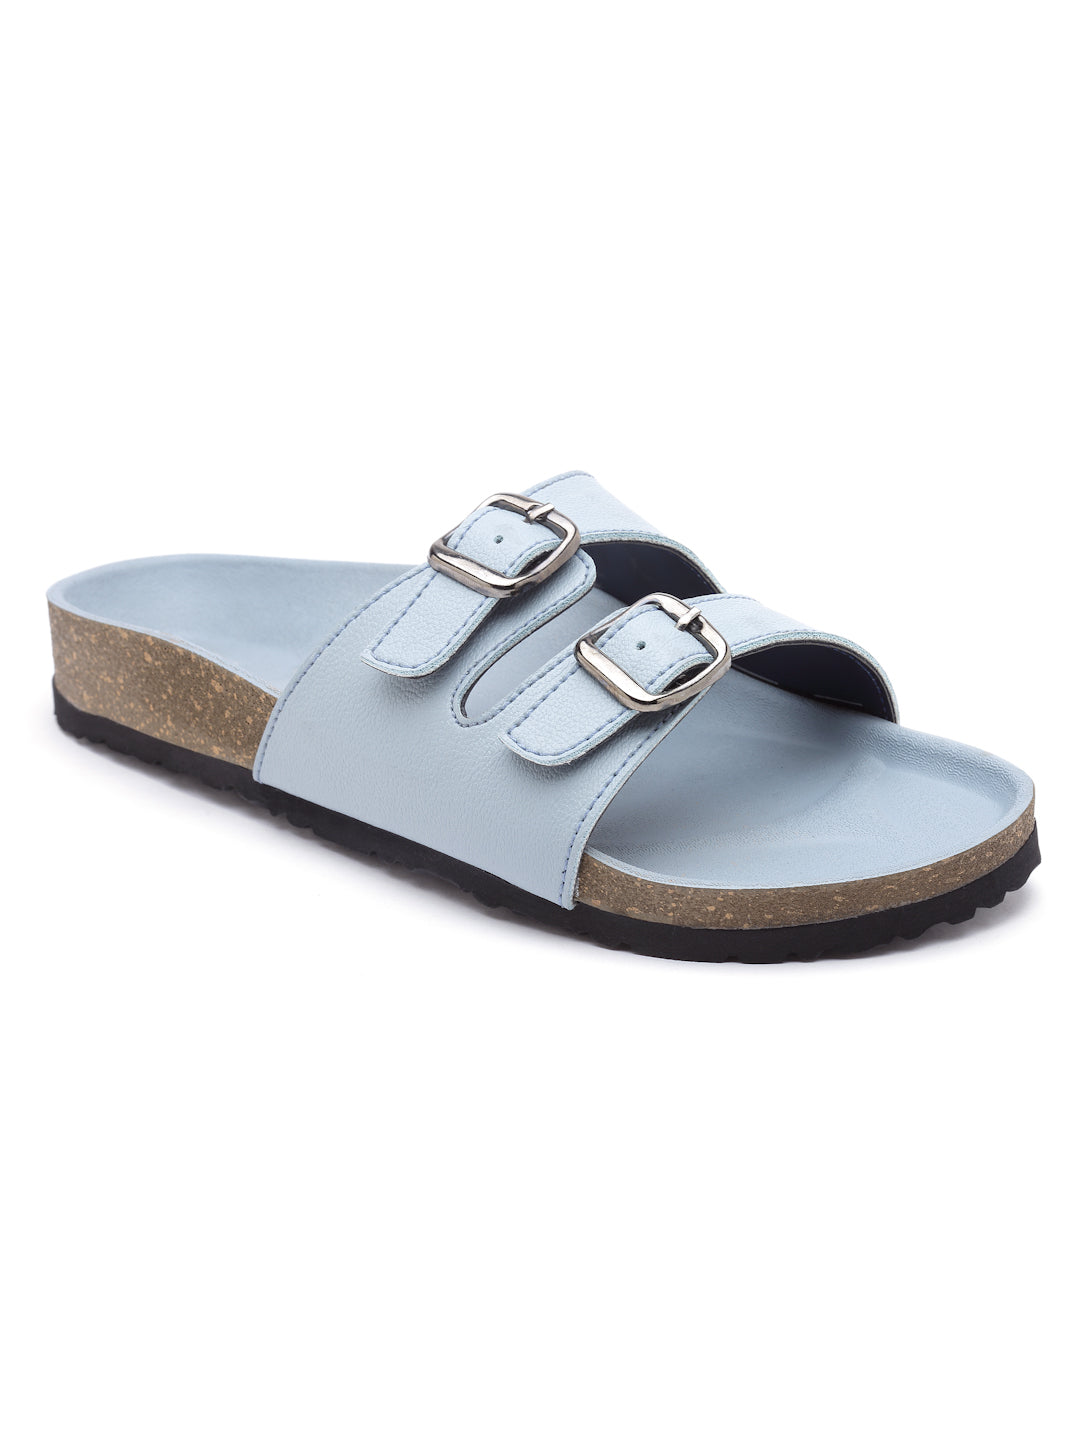 Women's Powder-Blue Synthetic Leather Casual Sandal